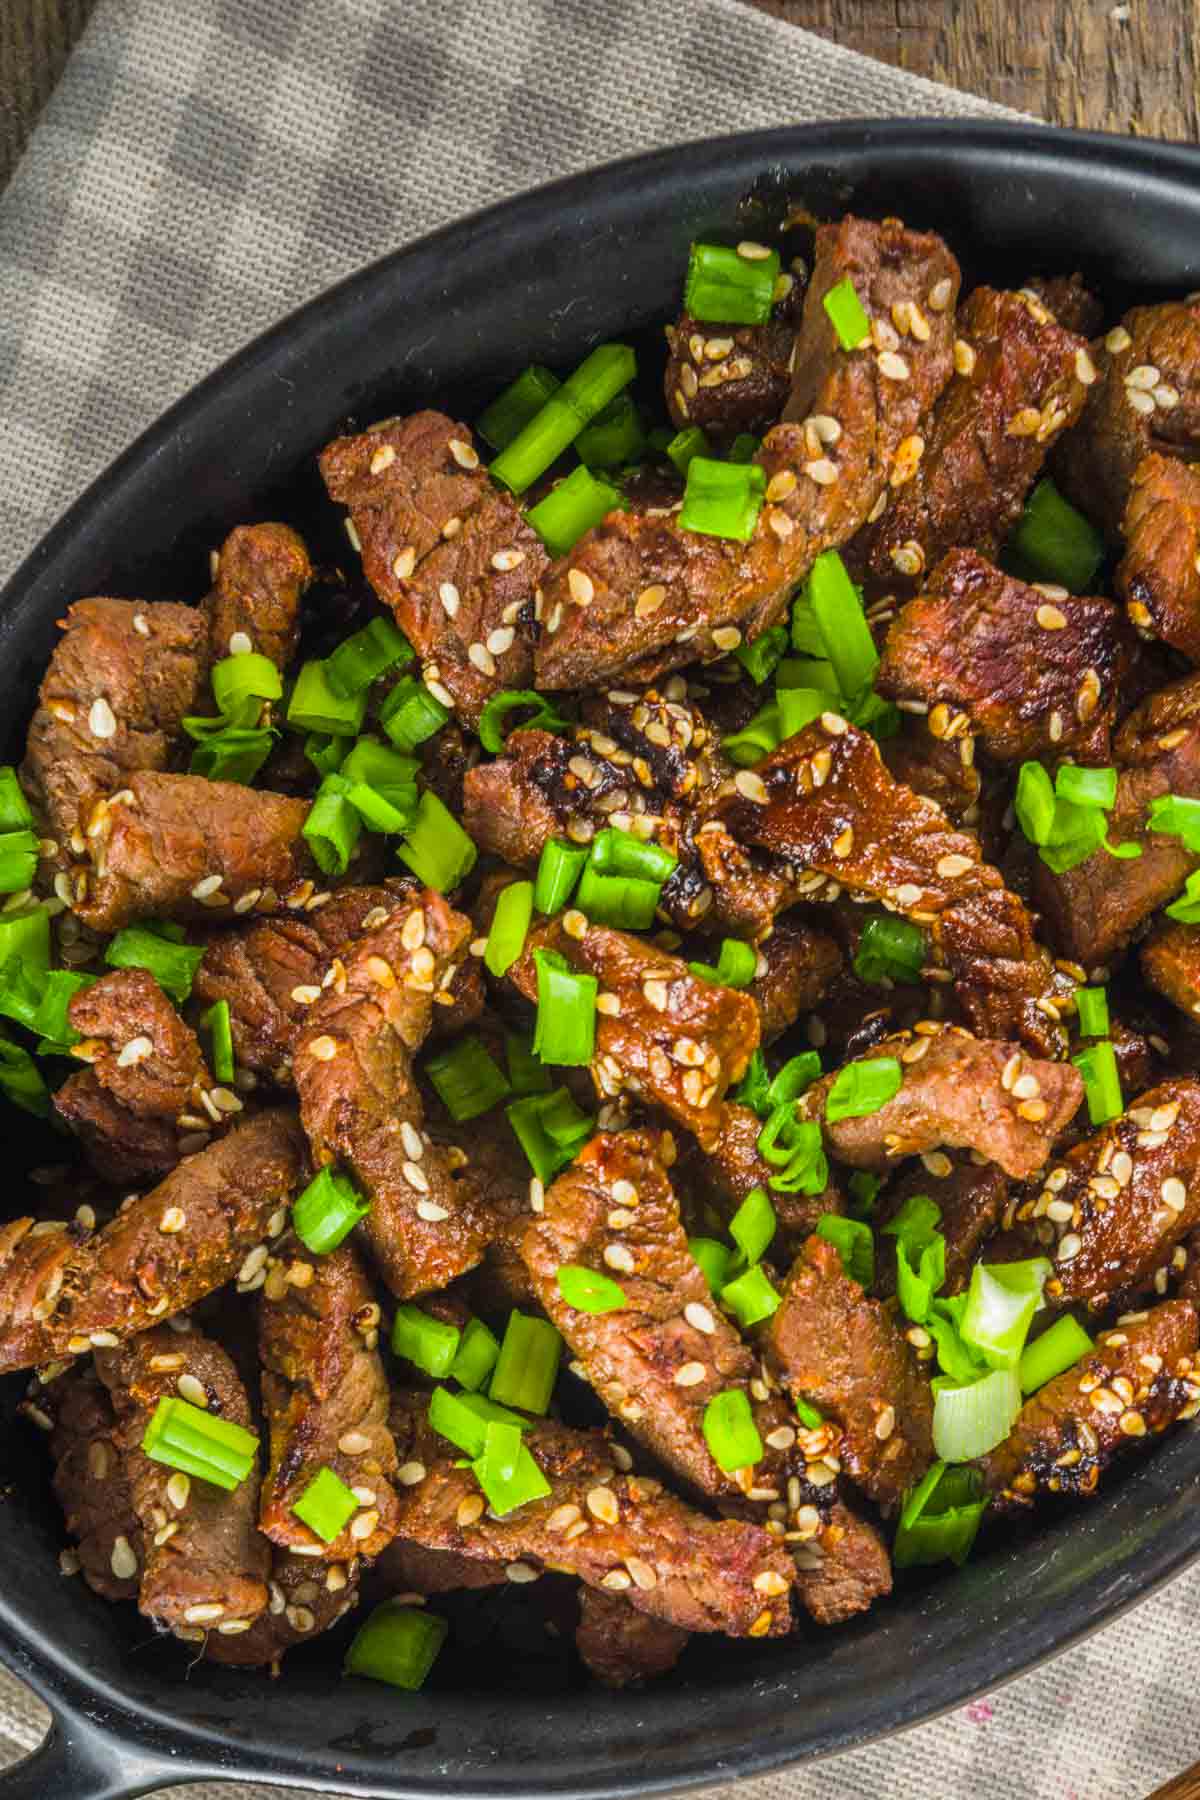 Bulgogi Sauce is sweet and savory with hints of pear, ginger, and garlic. It’s a staple ingredient in Korean BBQ Beef. This easy recipe is made from scratch and adds great flavors to your grilled beef. You can also use it in the marinade, dipping sauce, burgers, stir-fry chicken, or pork served with rice or noodles.